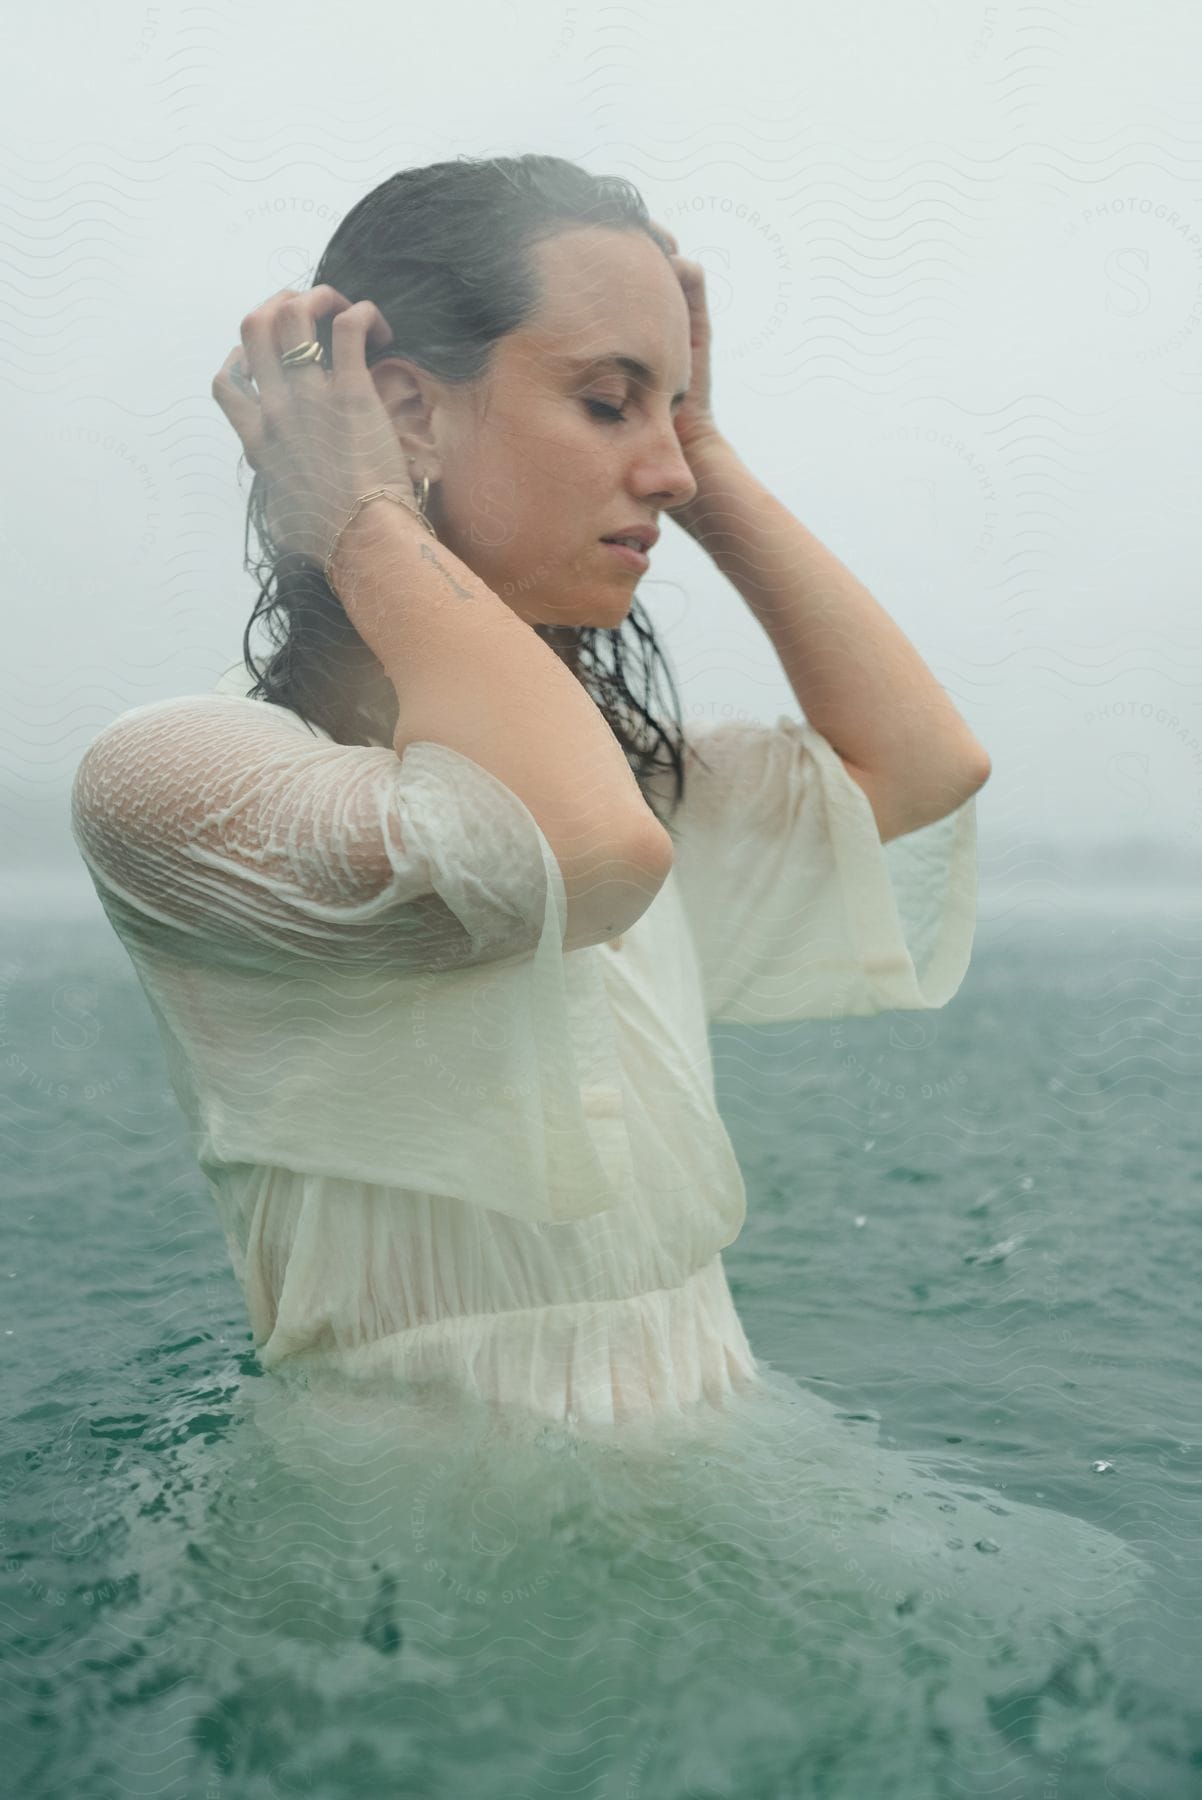 A woman in a white dress caresses her hair while bathing in a lake on a cloudy day